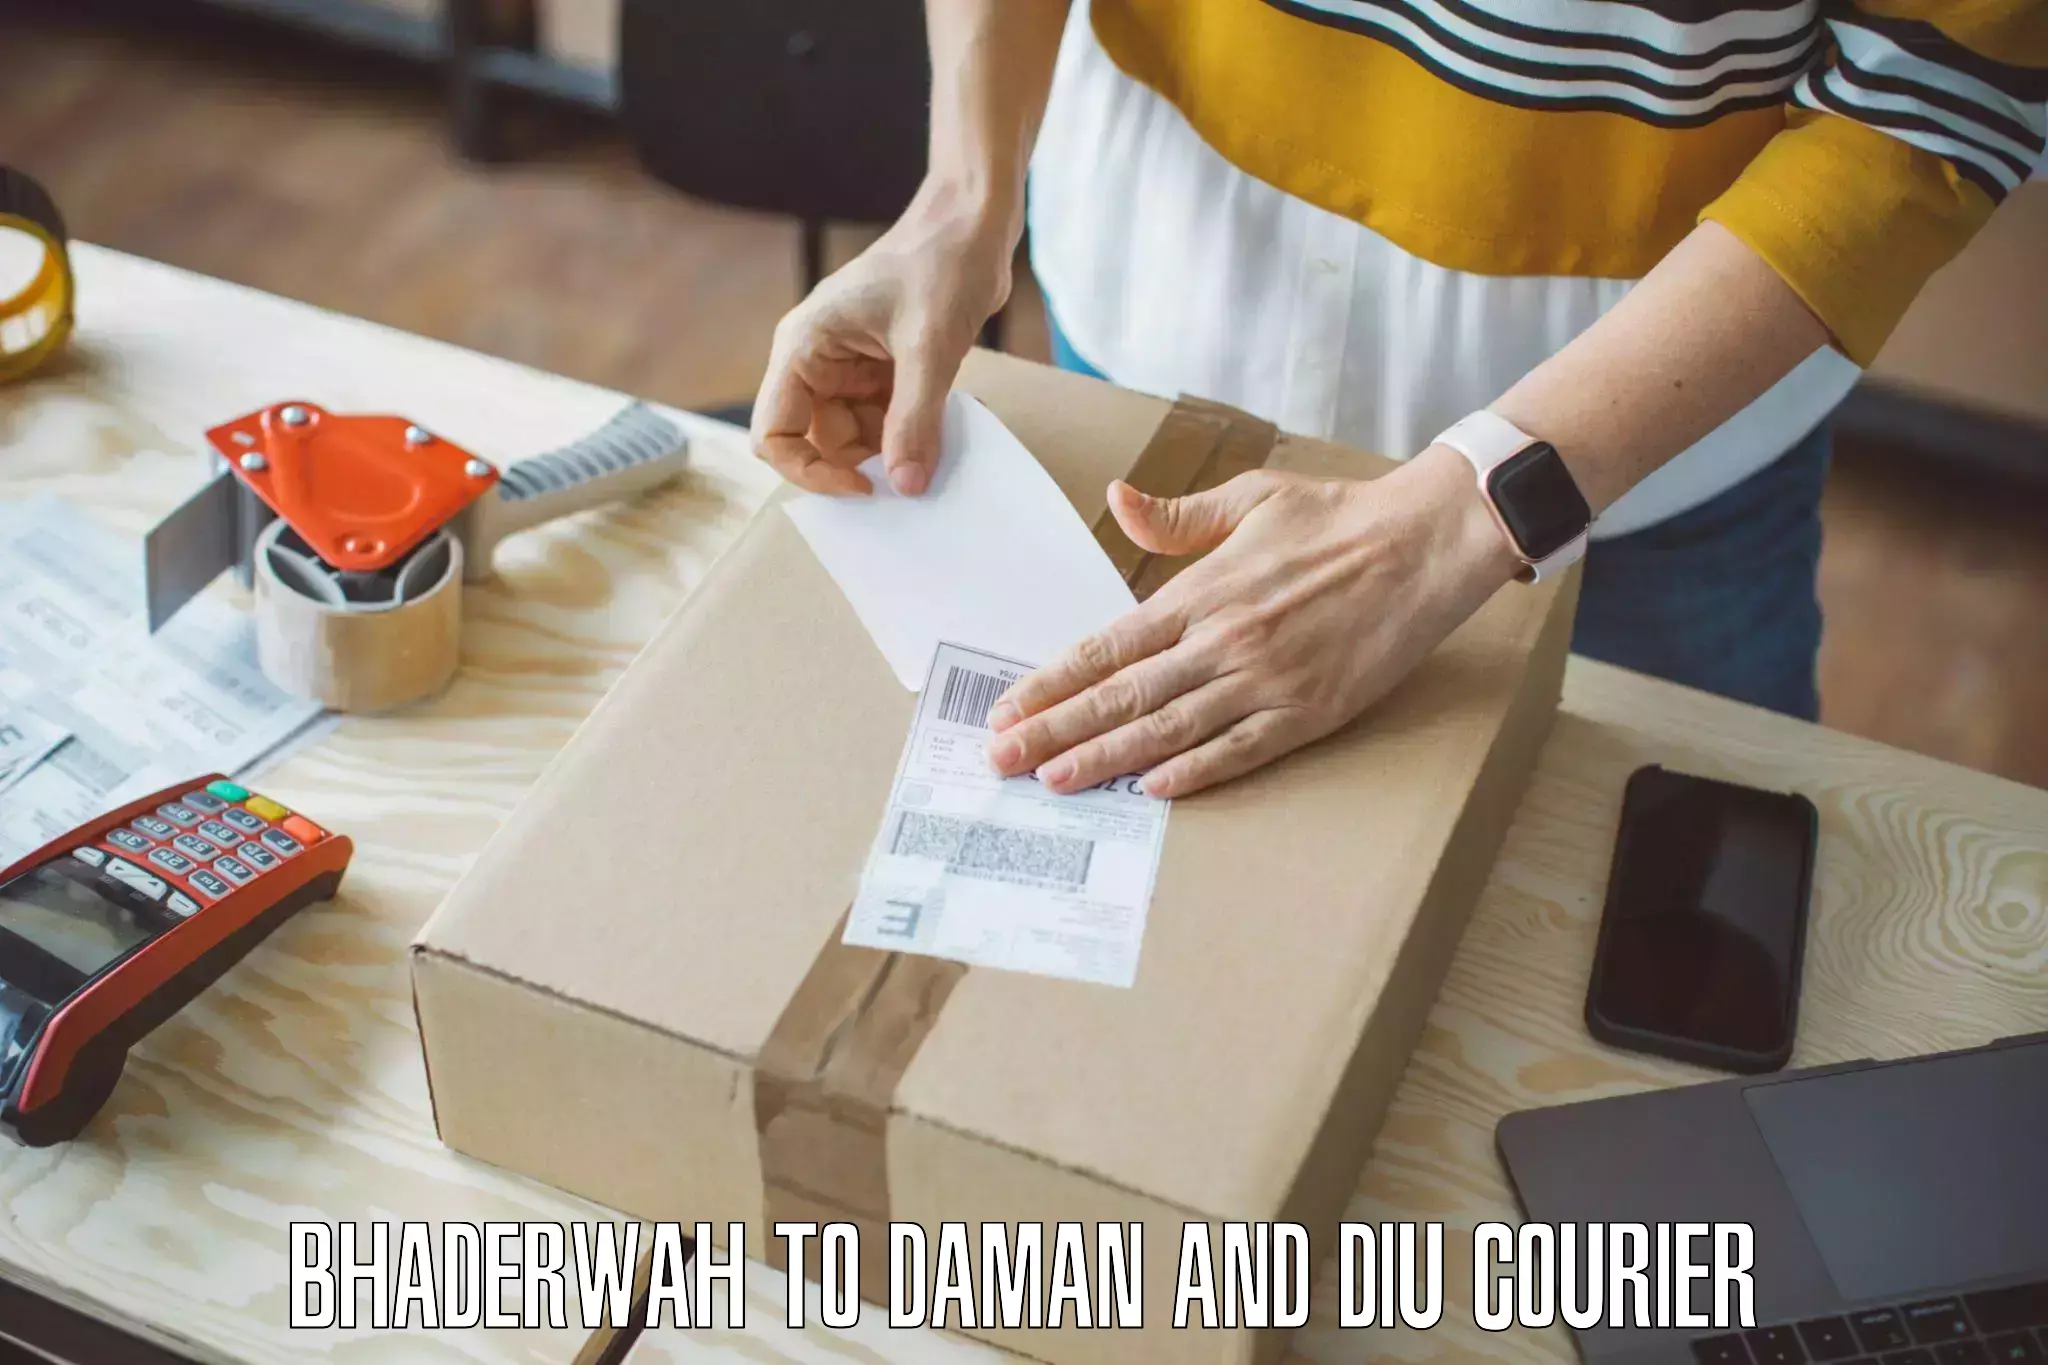 Furniture delivery service Bhaderwah to Daman and Diu